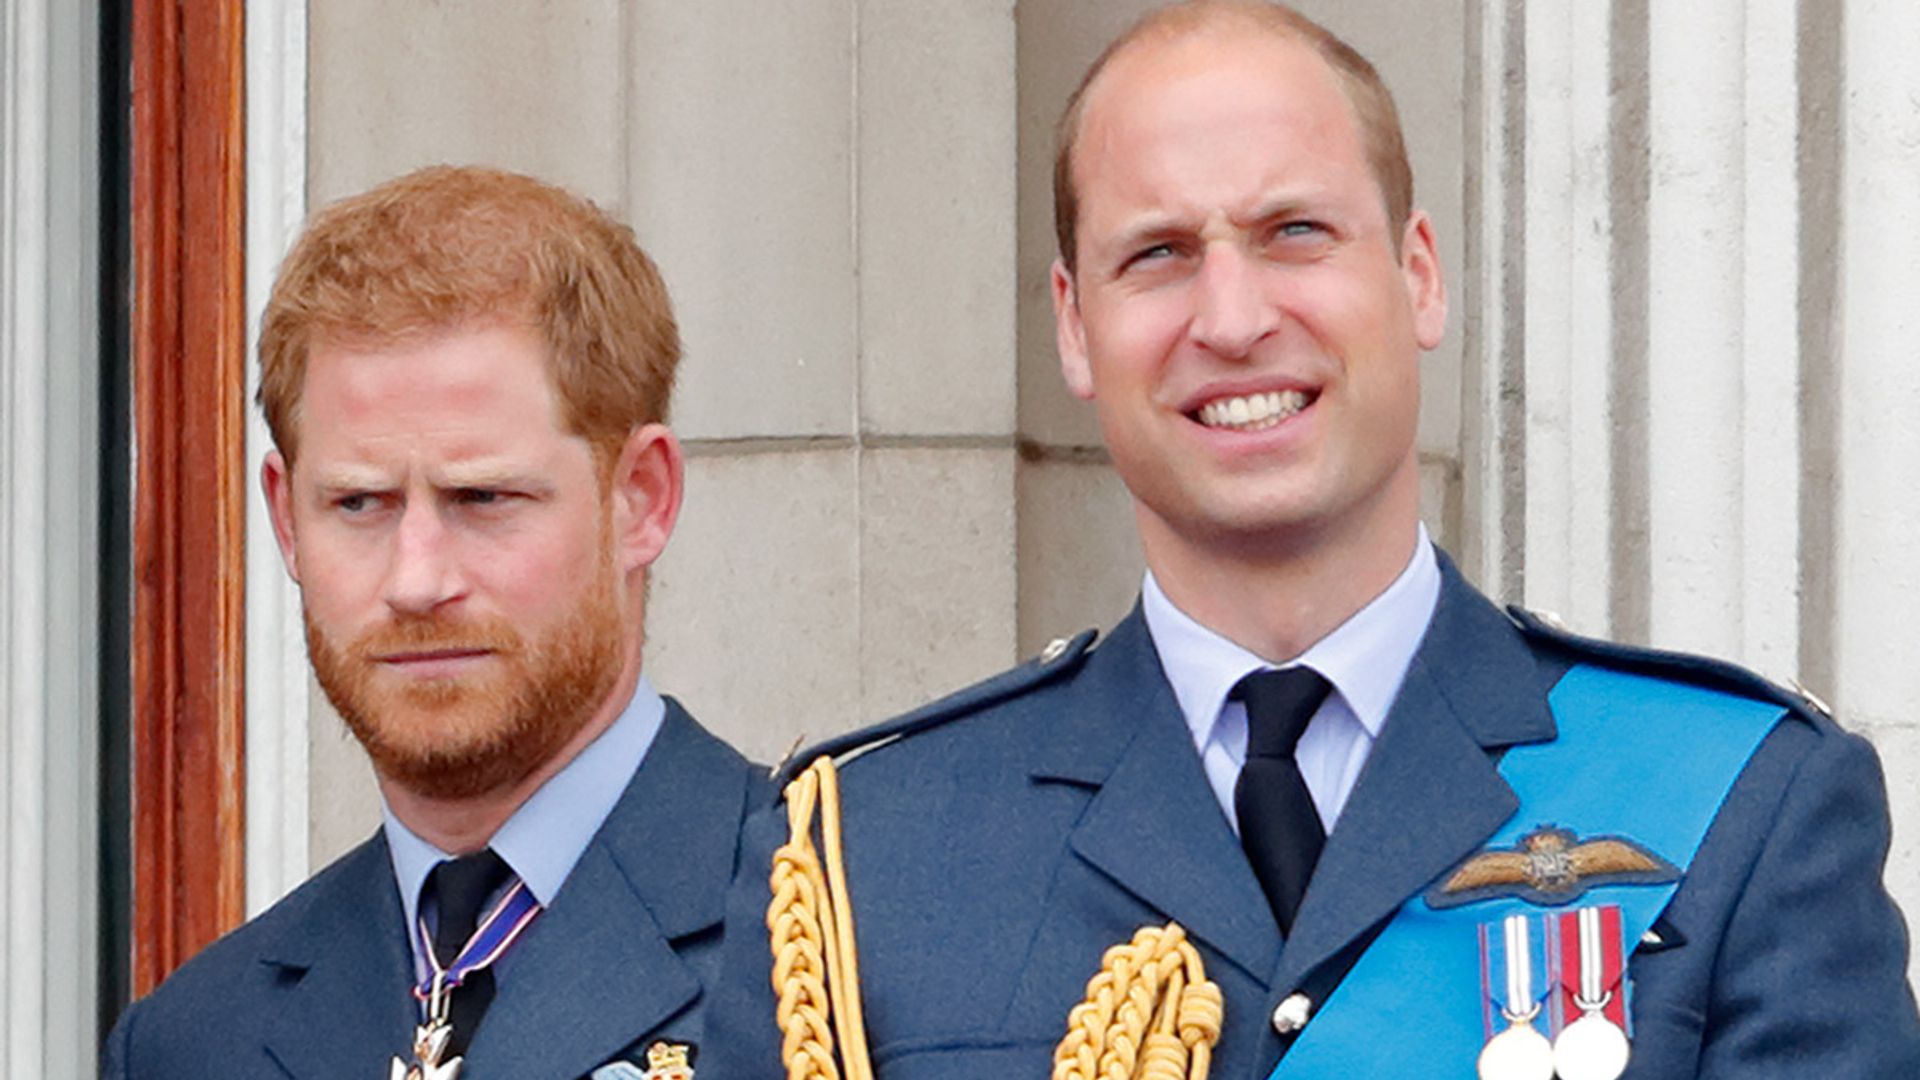 prince harry and prince william on balcony